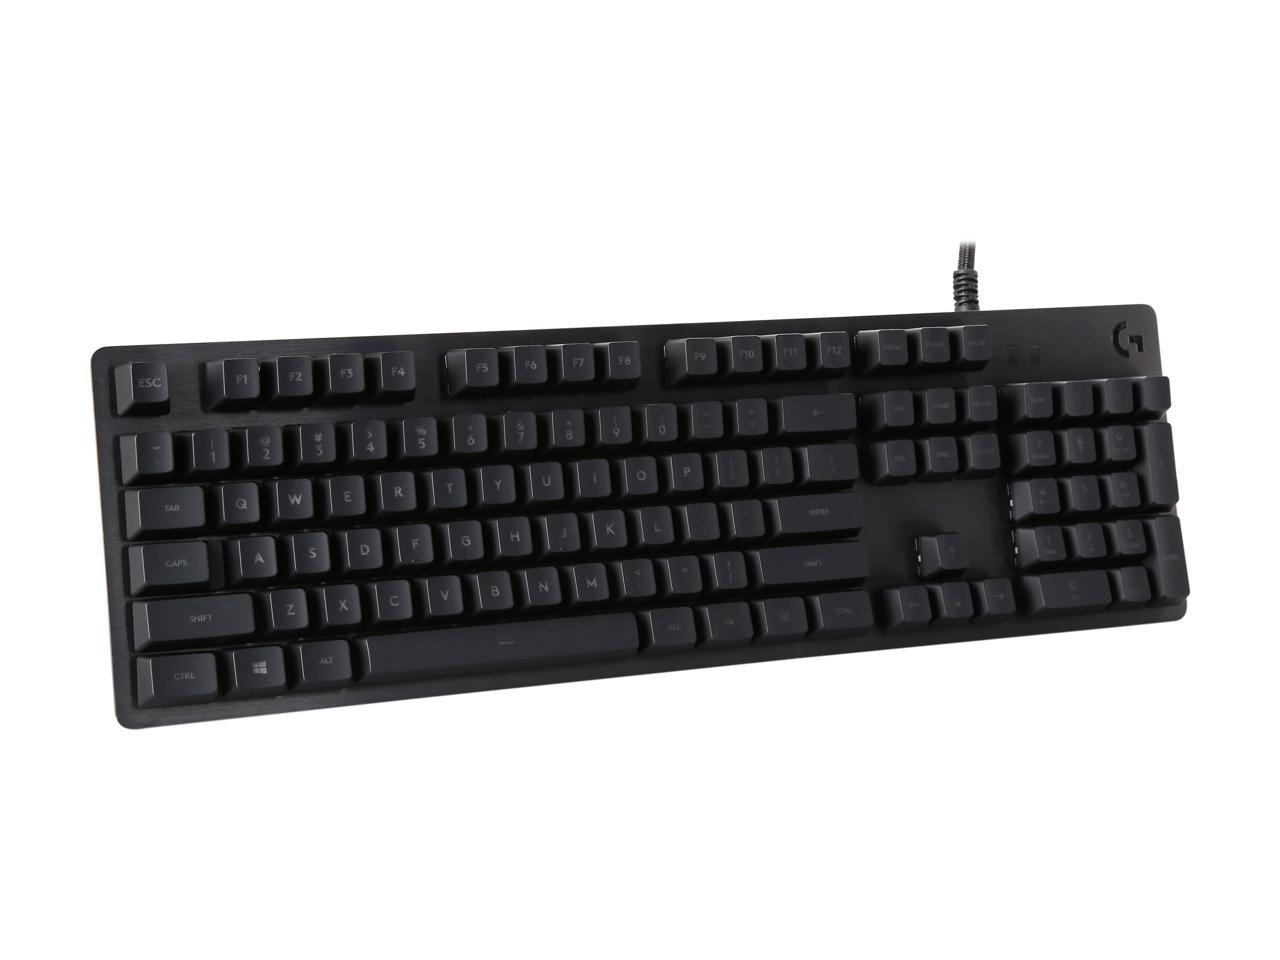 Logitech G513 RGB Backlit Mechanical Gaming Keyboard with GX Blue Clicky Key Switches (Carbon)